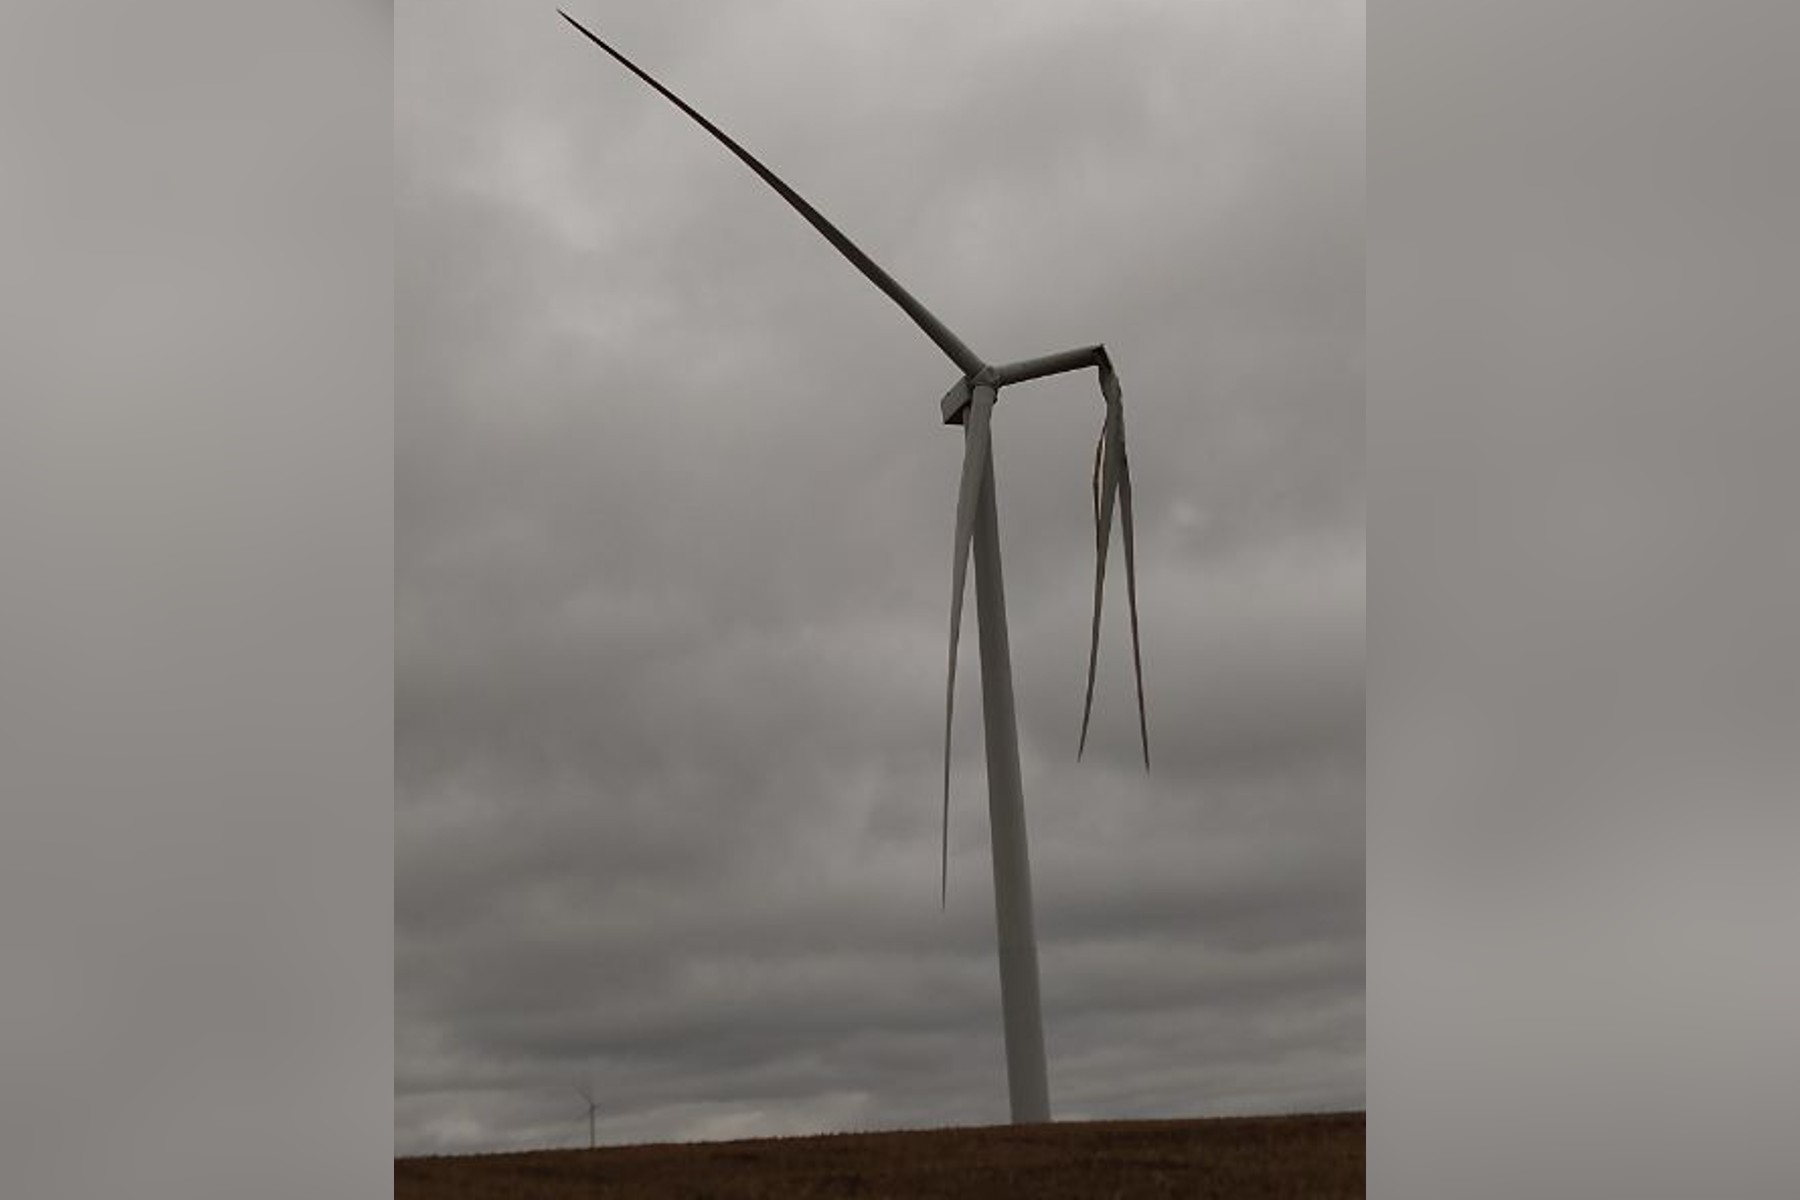 IN-DEPTH: 'No Remediation': A Broken Turbine in Kansas Shows how Wind  Companies Evade Responsibility